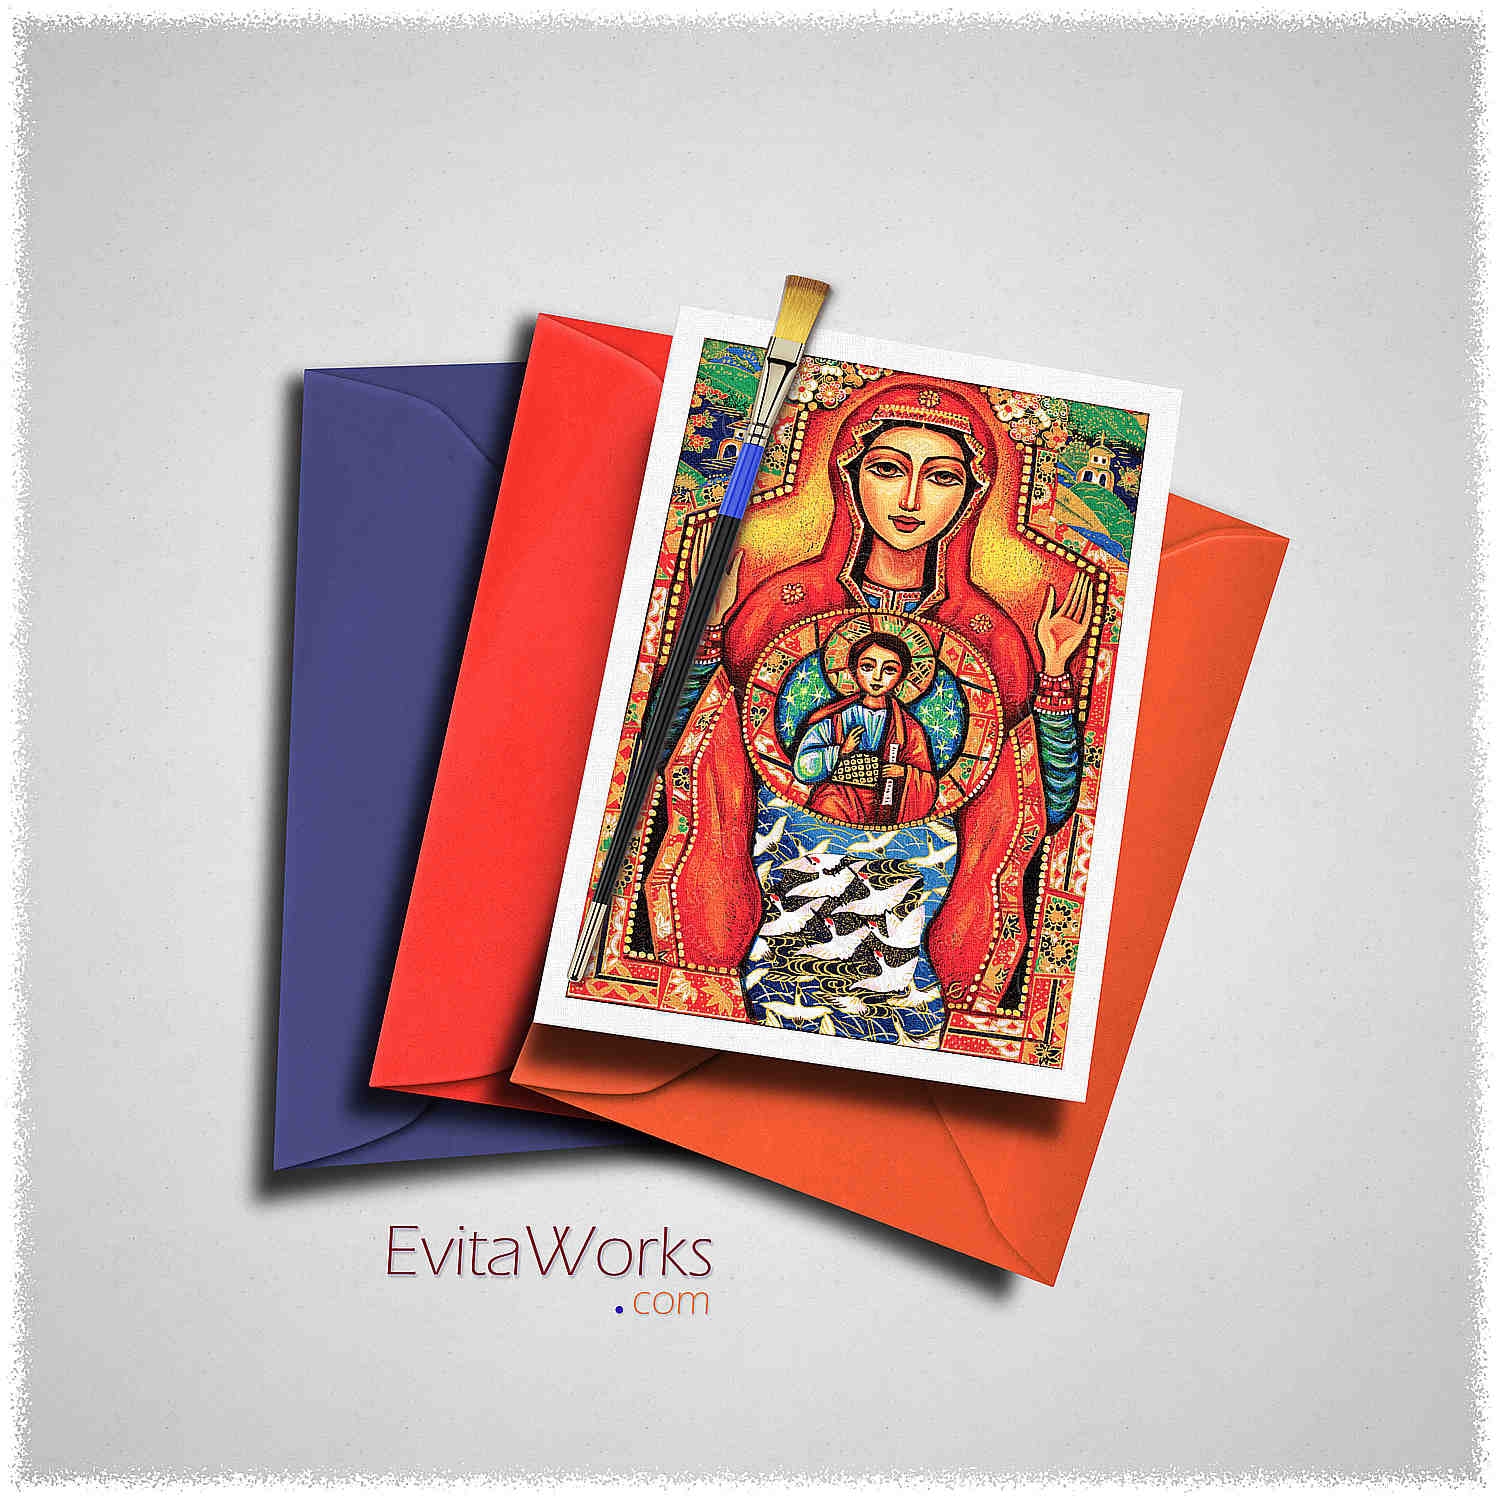 Hit to learn about "Our Lady Of The Sign, Mother and Child" on cards